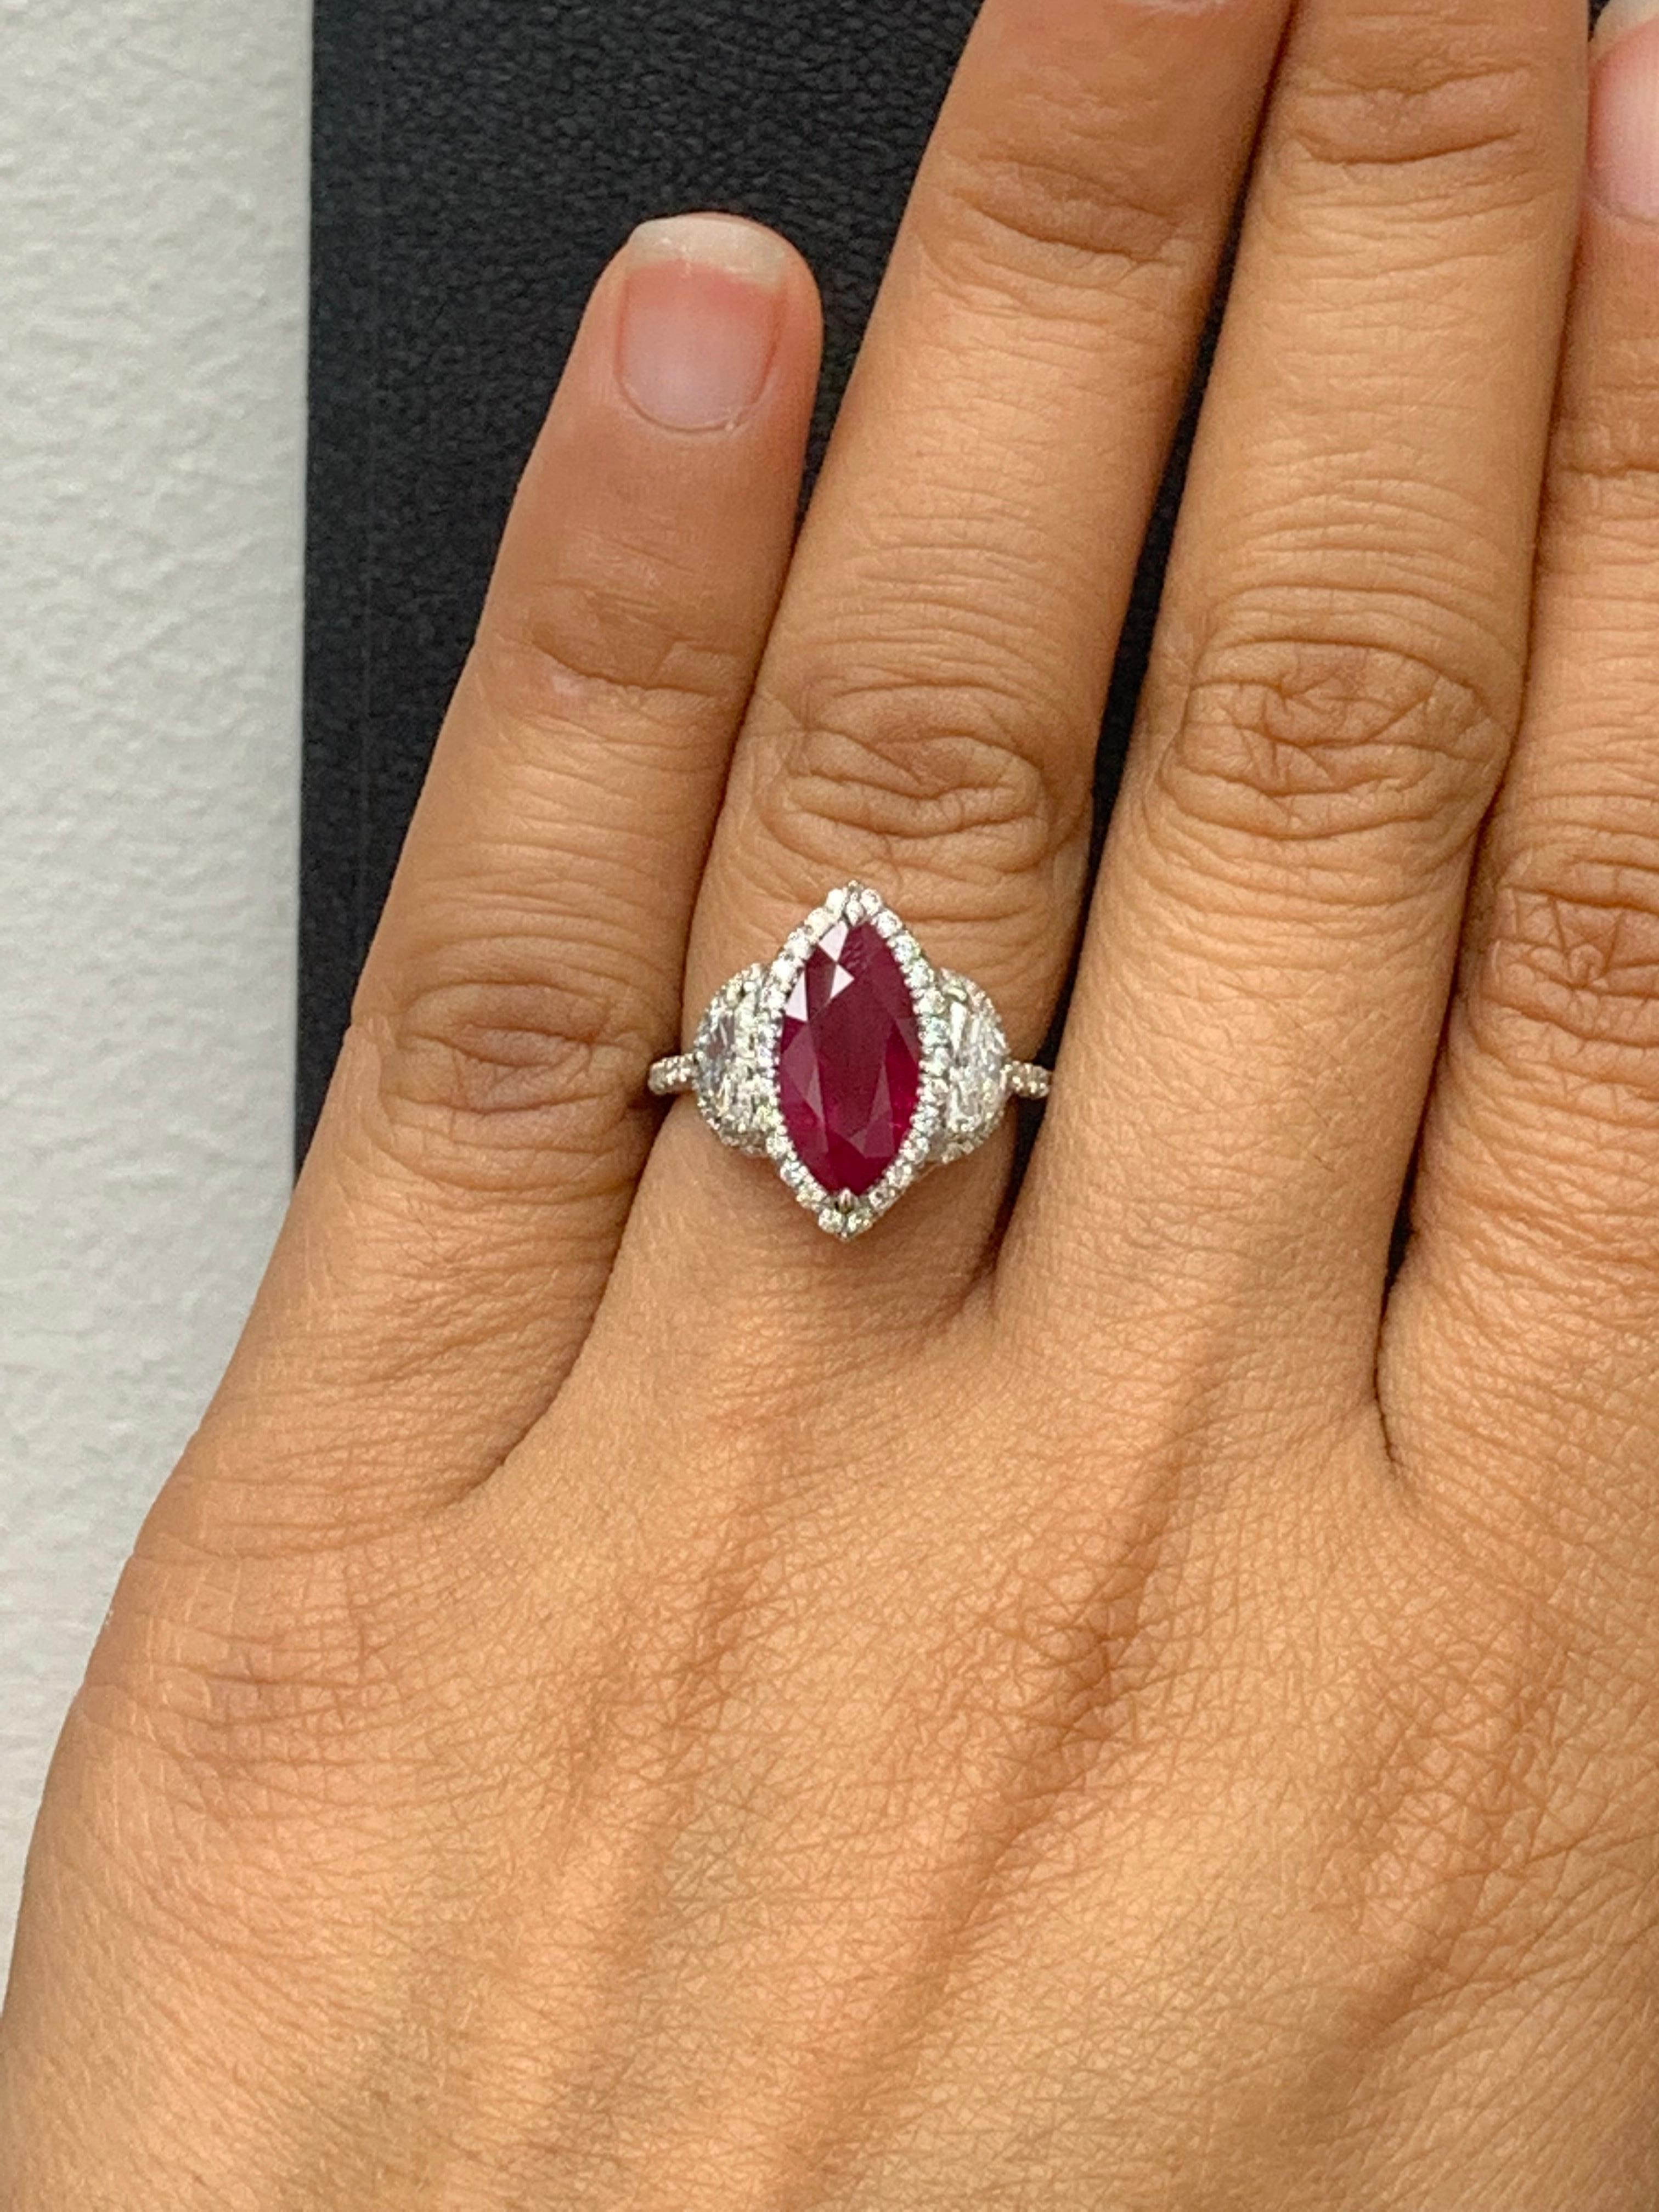 Certified 3.01 Carat Marquise Cut Burma Ruby Diamond 3 Stone Halo Ring Platinum For Sale 11